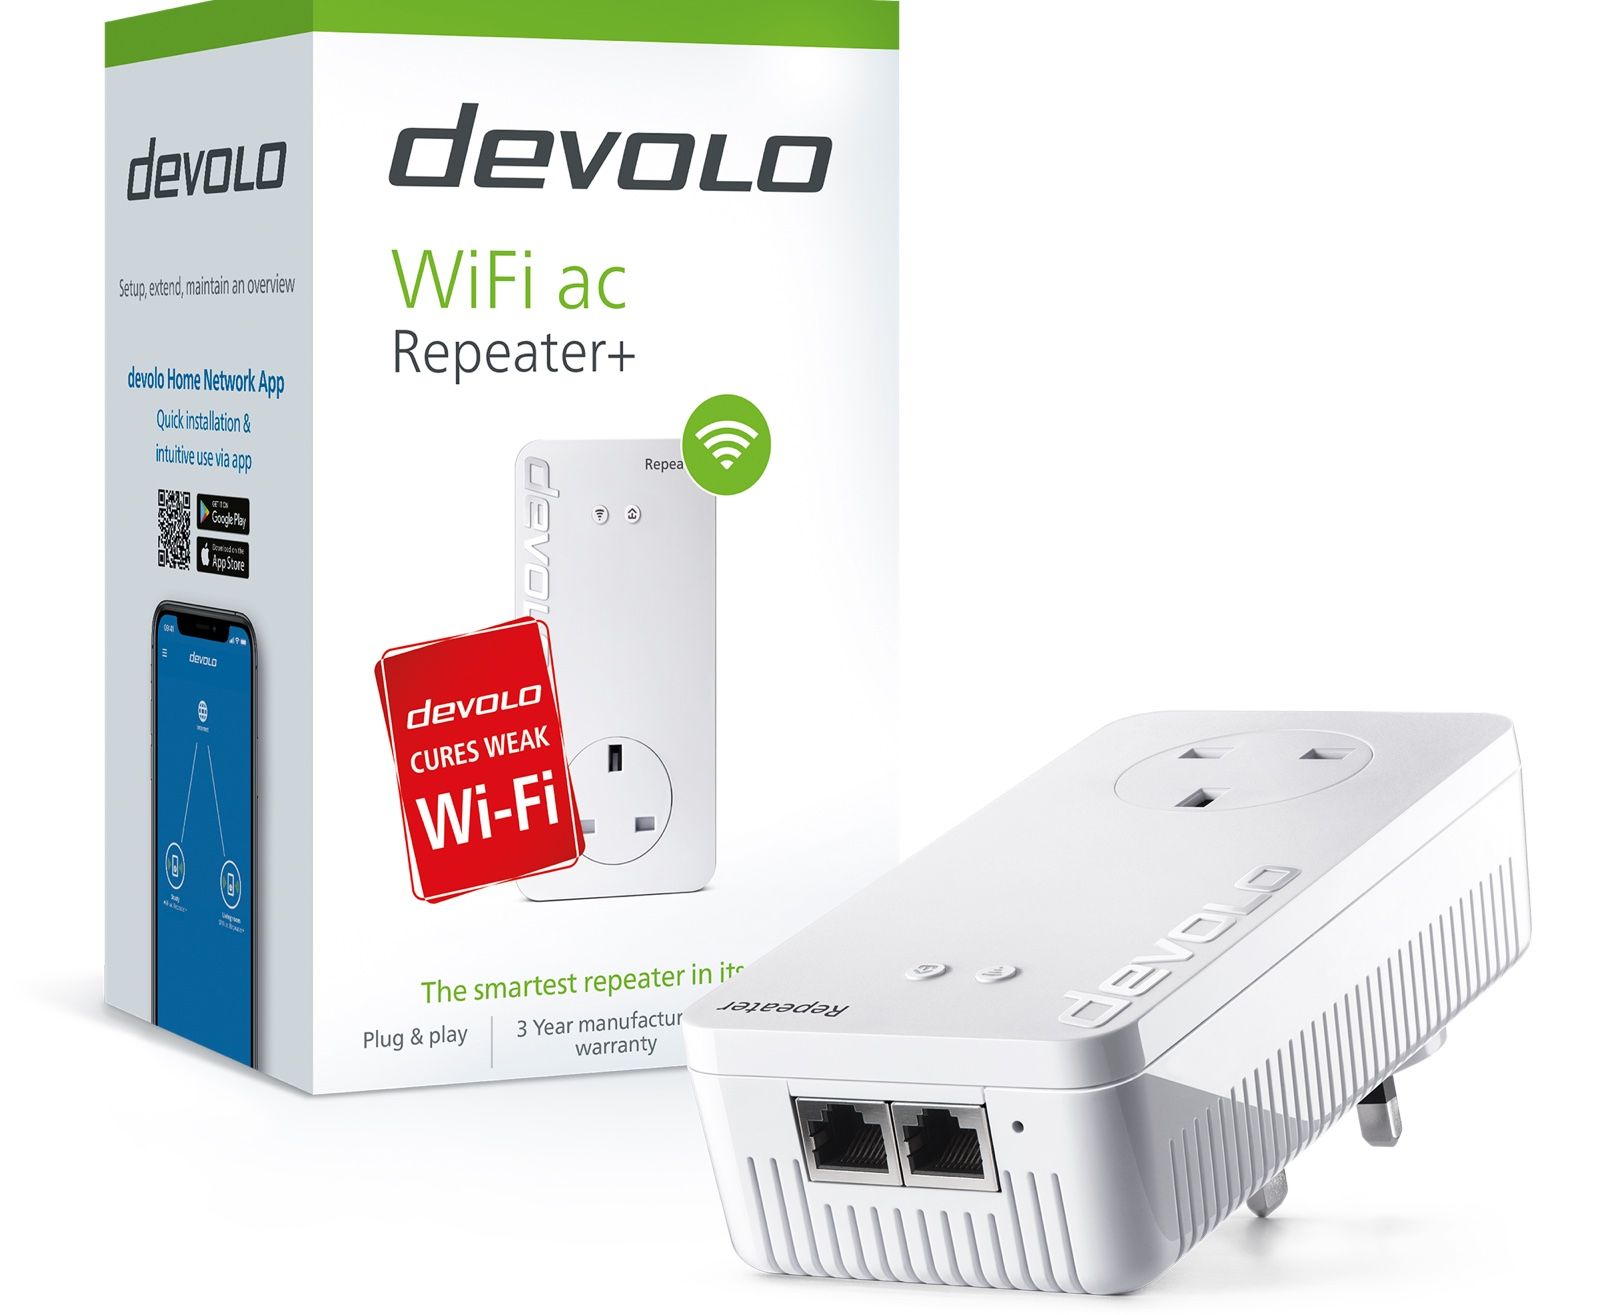 Cure your weak Wi-Fi woes with the devolo WiFi ac Repeater+ photo 2